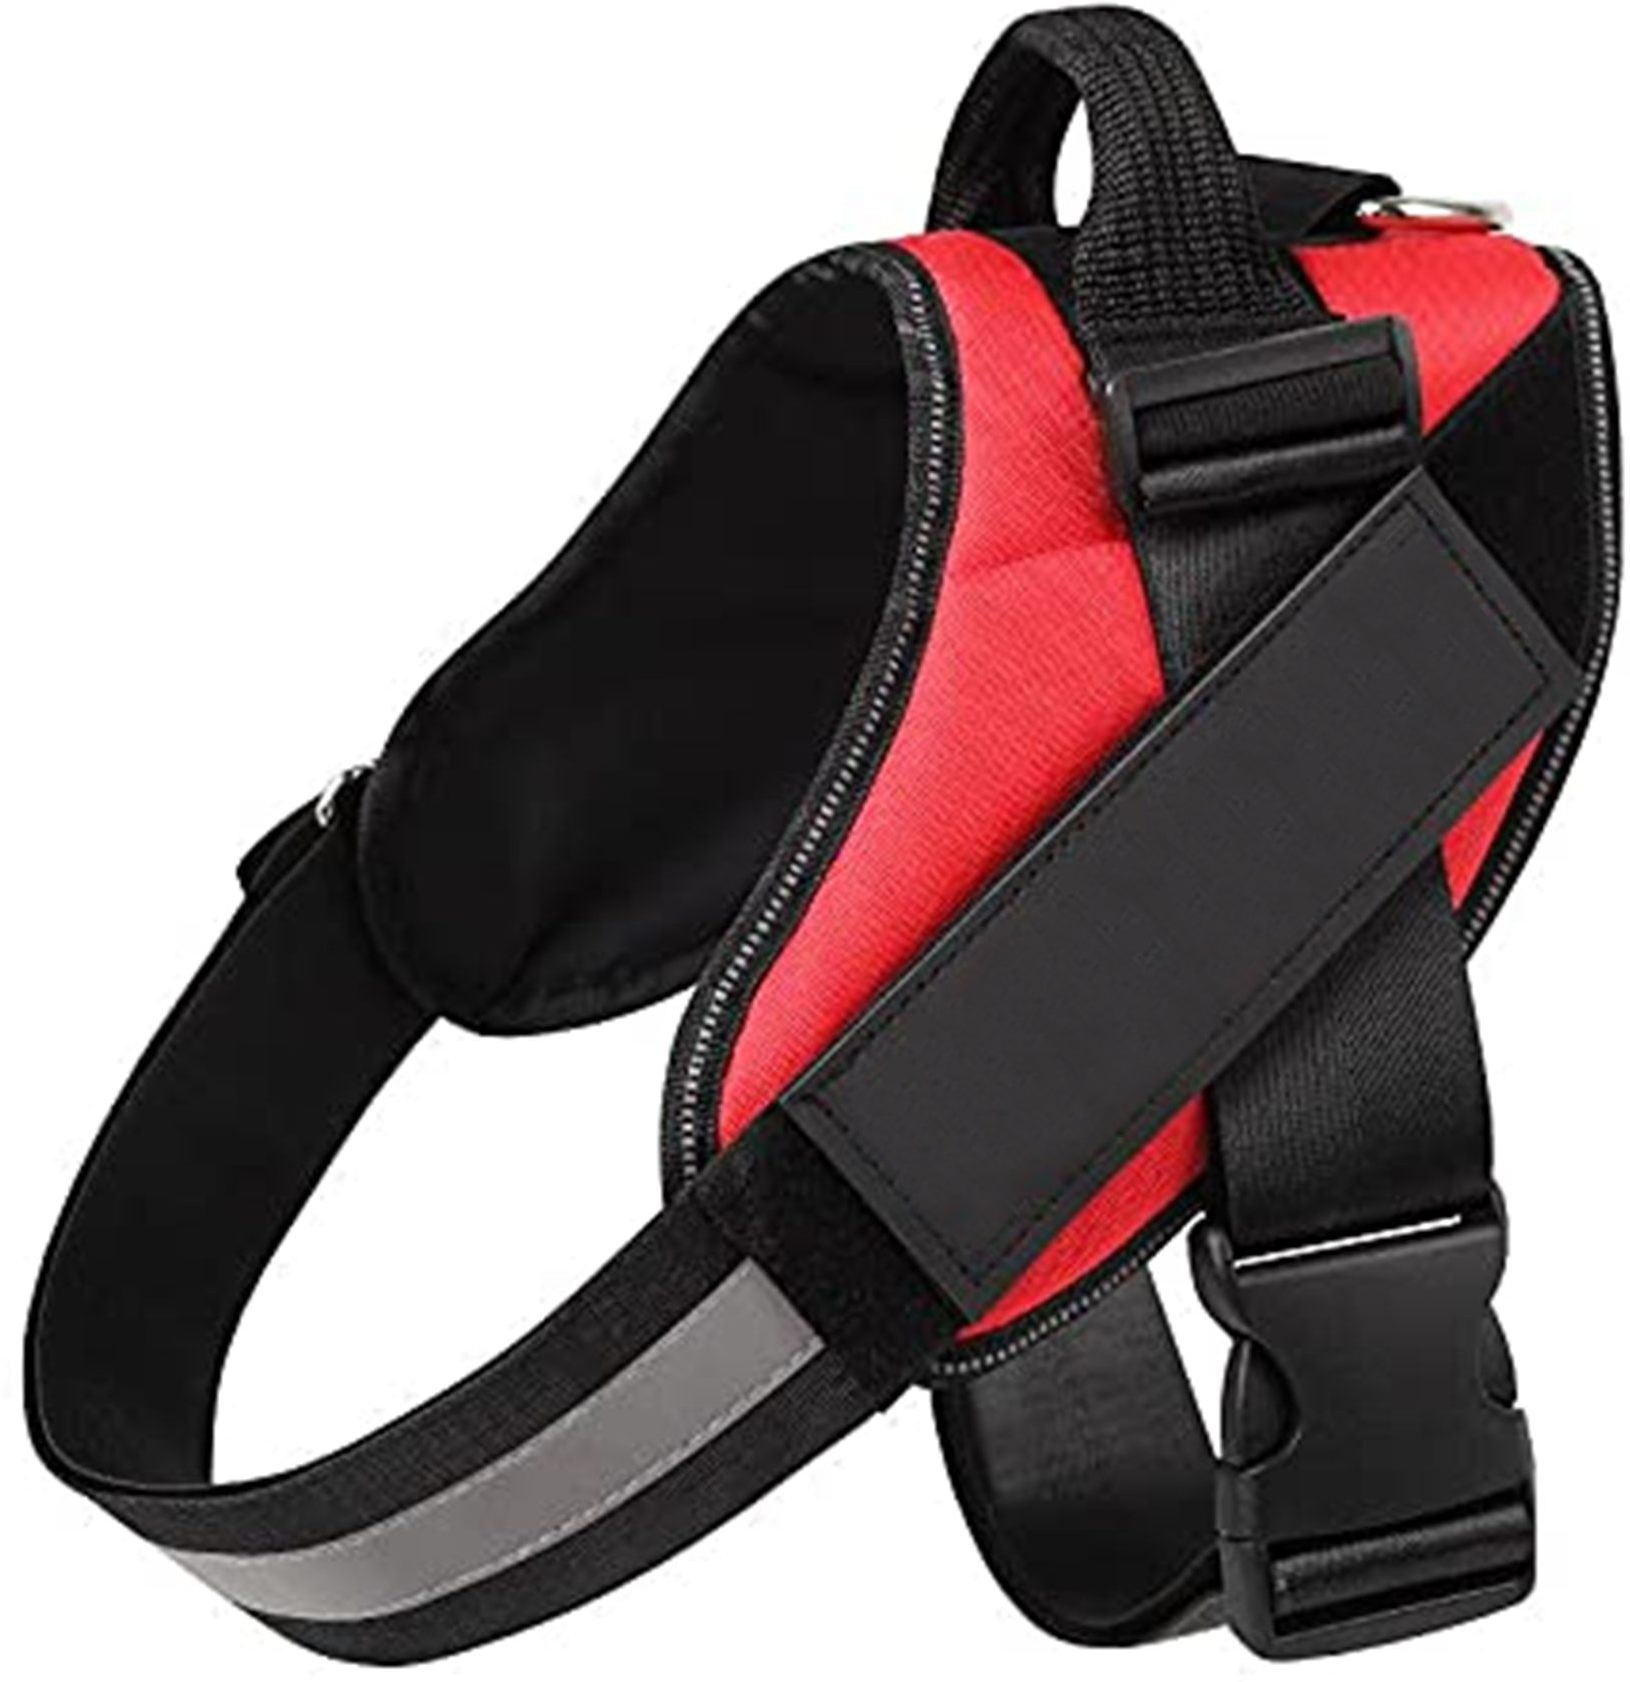 Premium Quality No Pull Standard Dog Harness With Reflective Strip